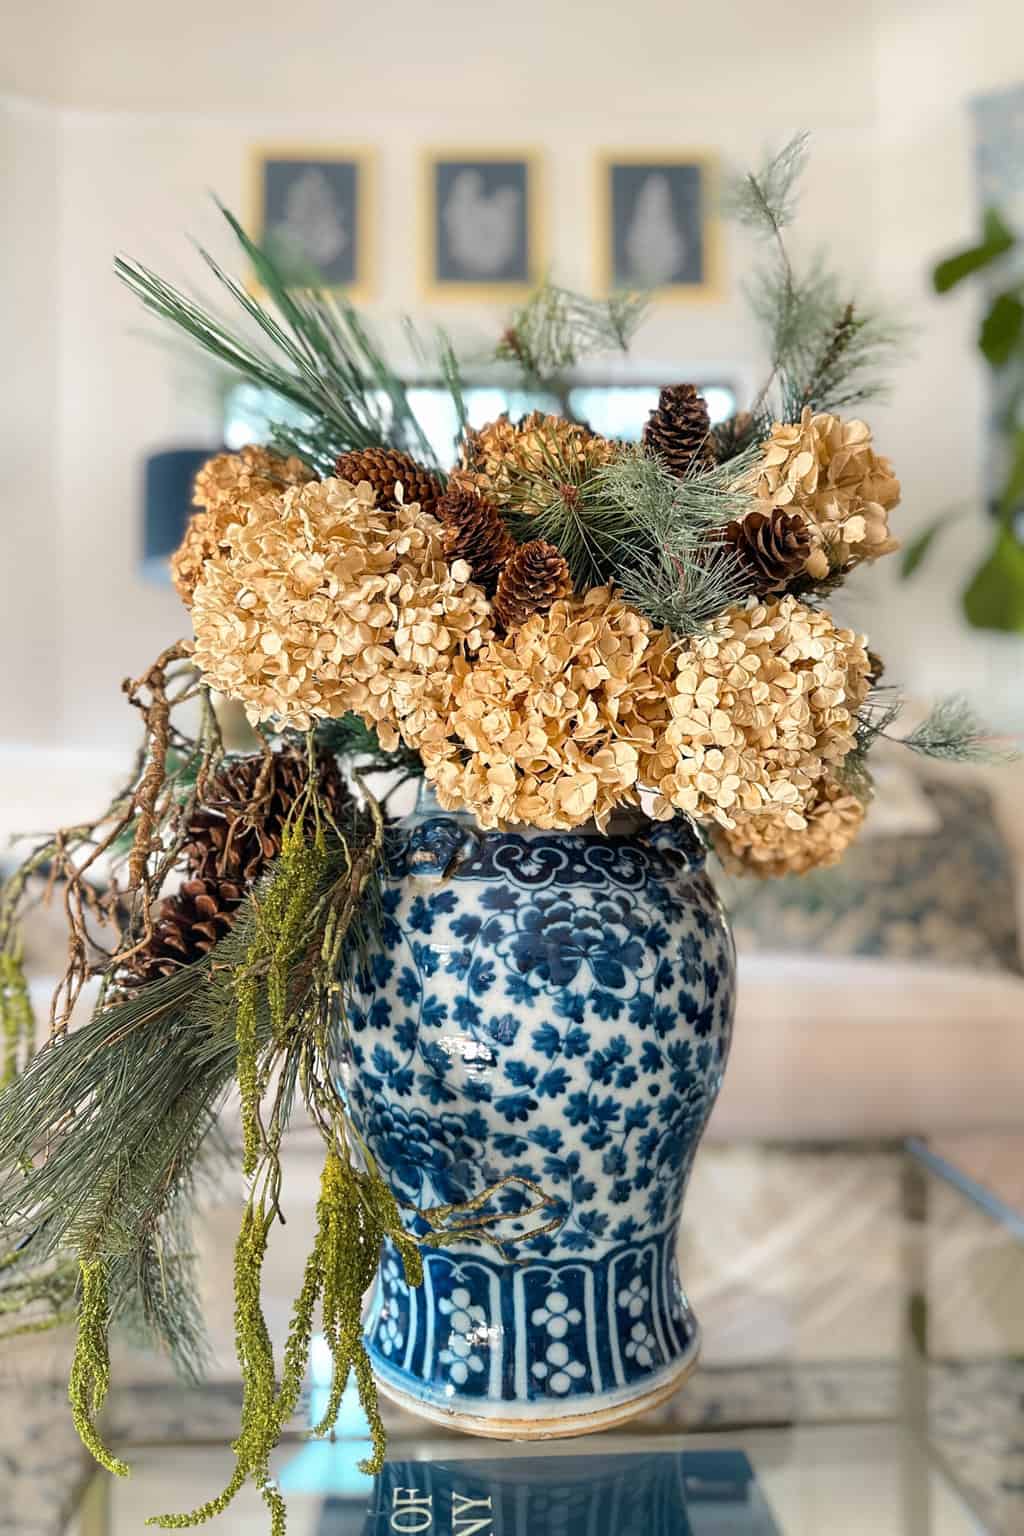 Winter decor that is not Christmas- A floral arrangement of dried hydrangeas, greens, and pinecones in a vintage blue and white vase.